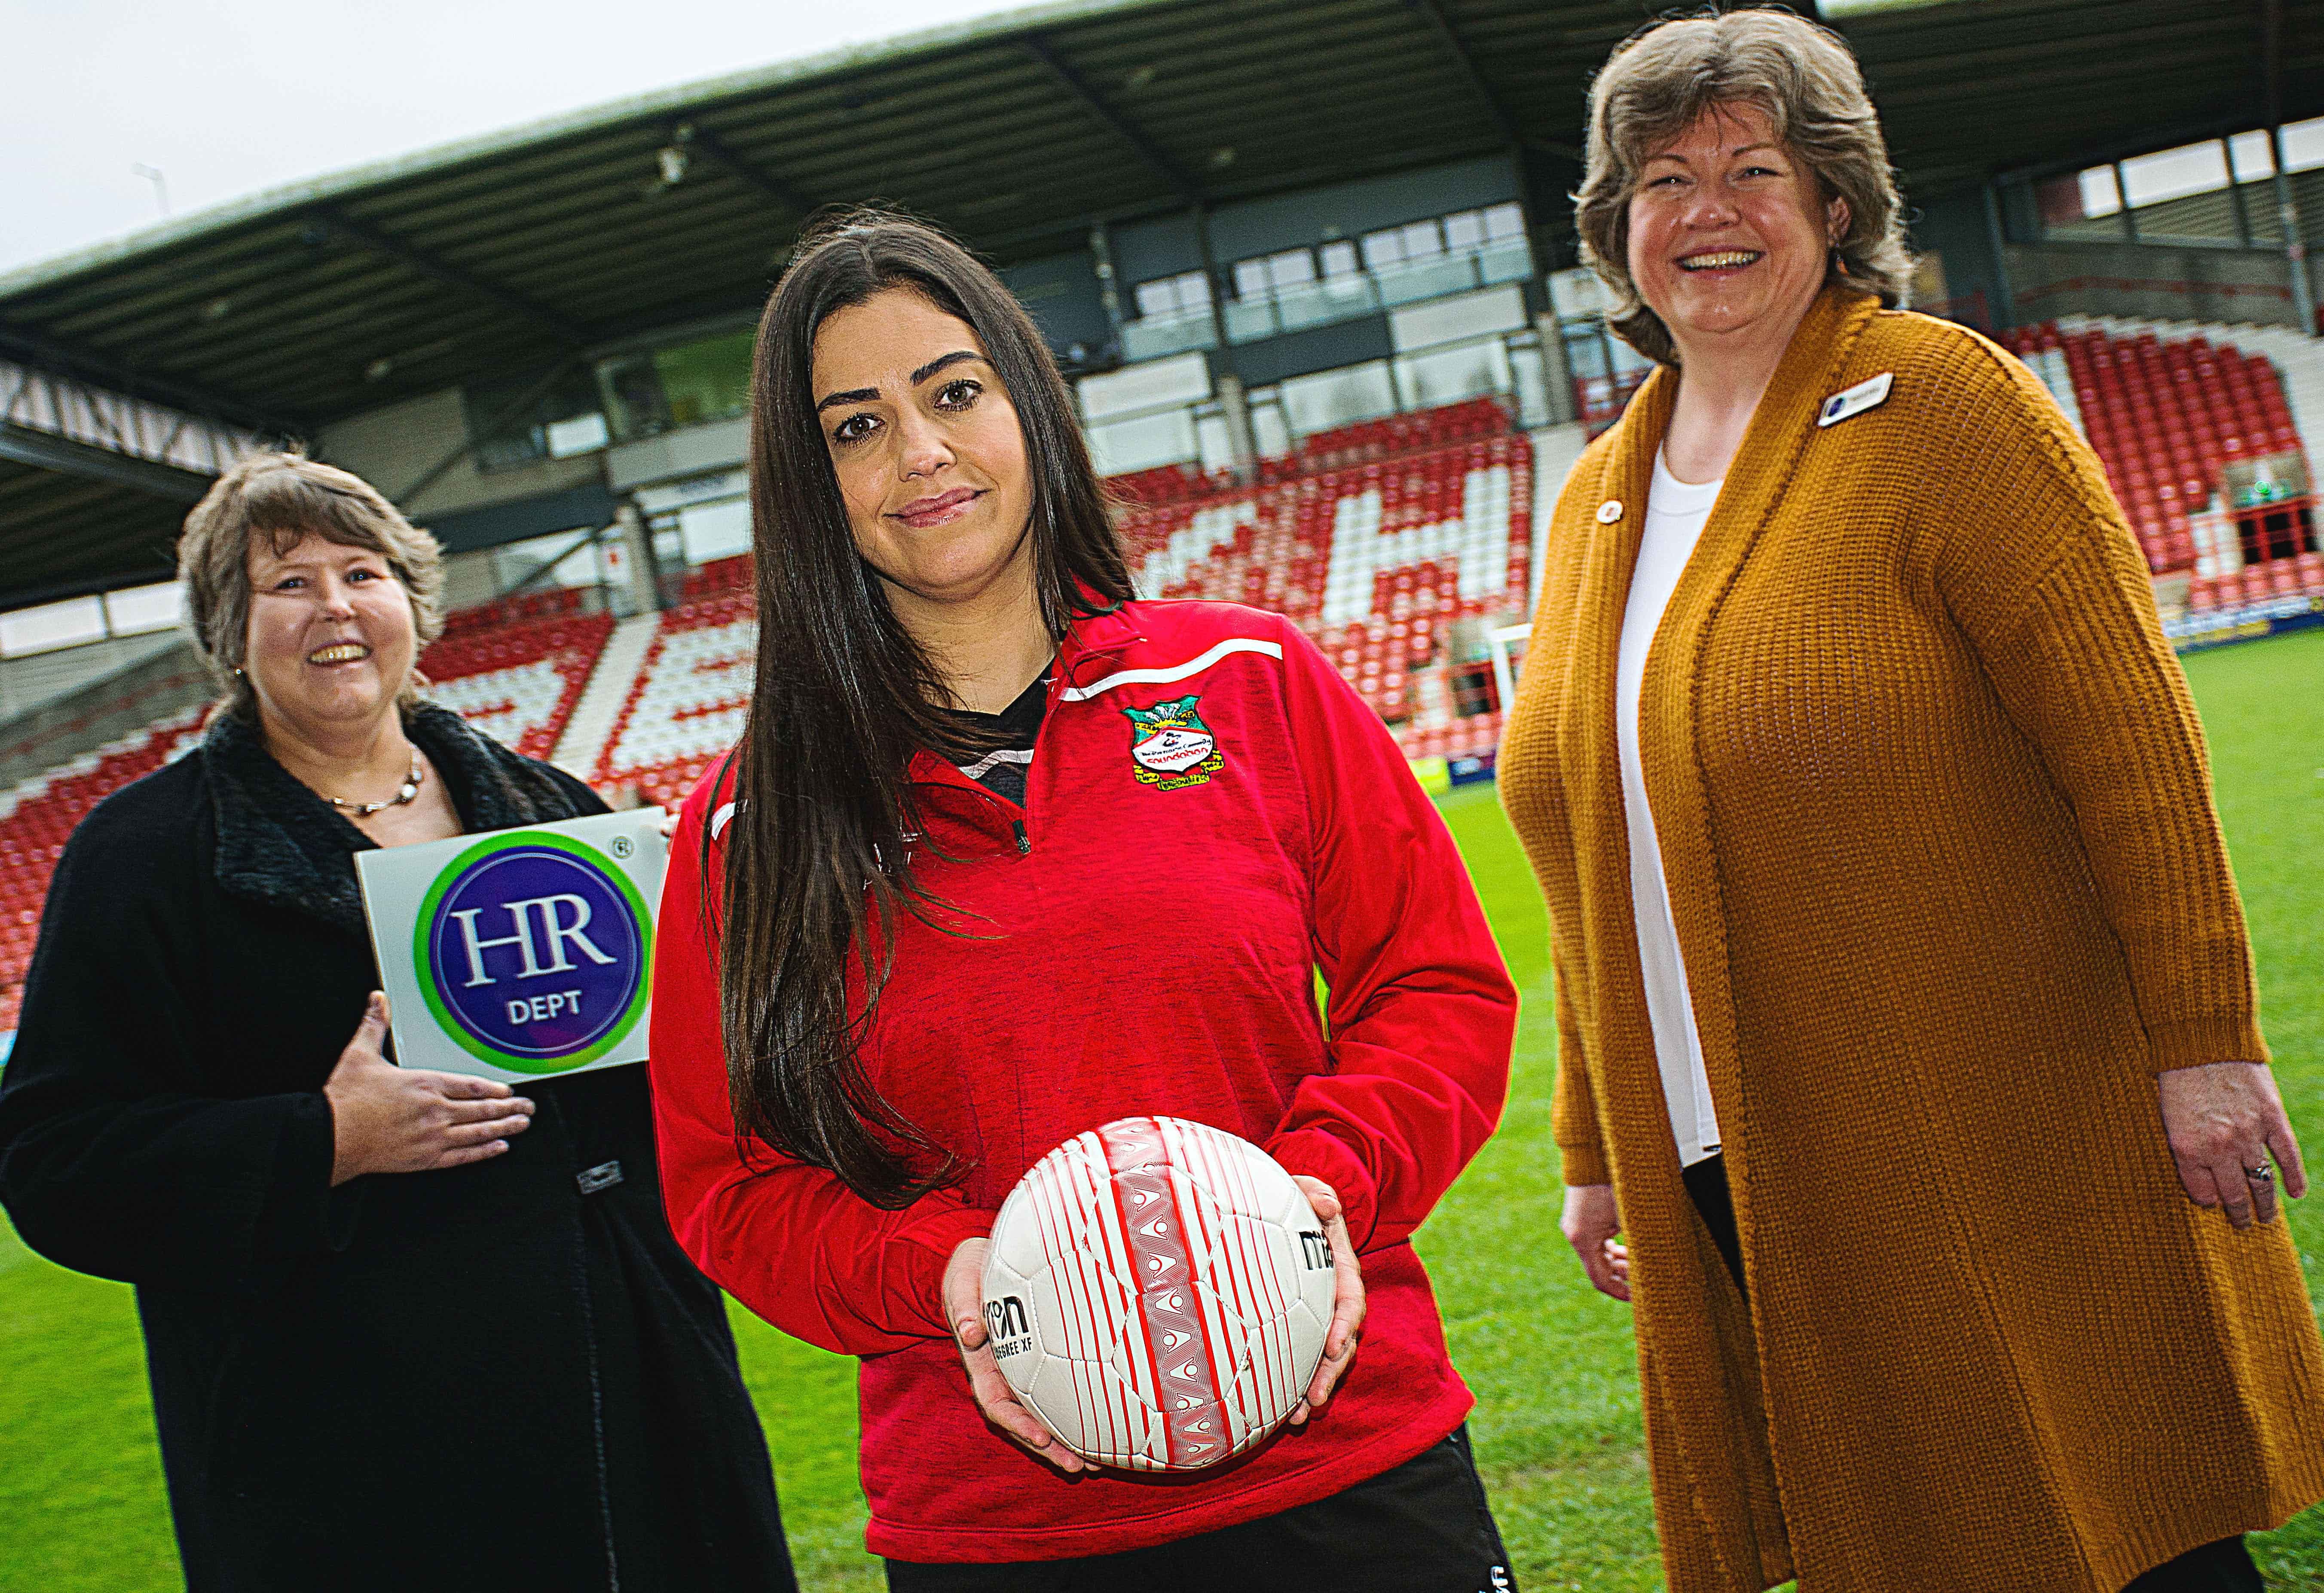 Wrexham hits another winner with sponsorship deal!  UK News Group